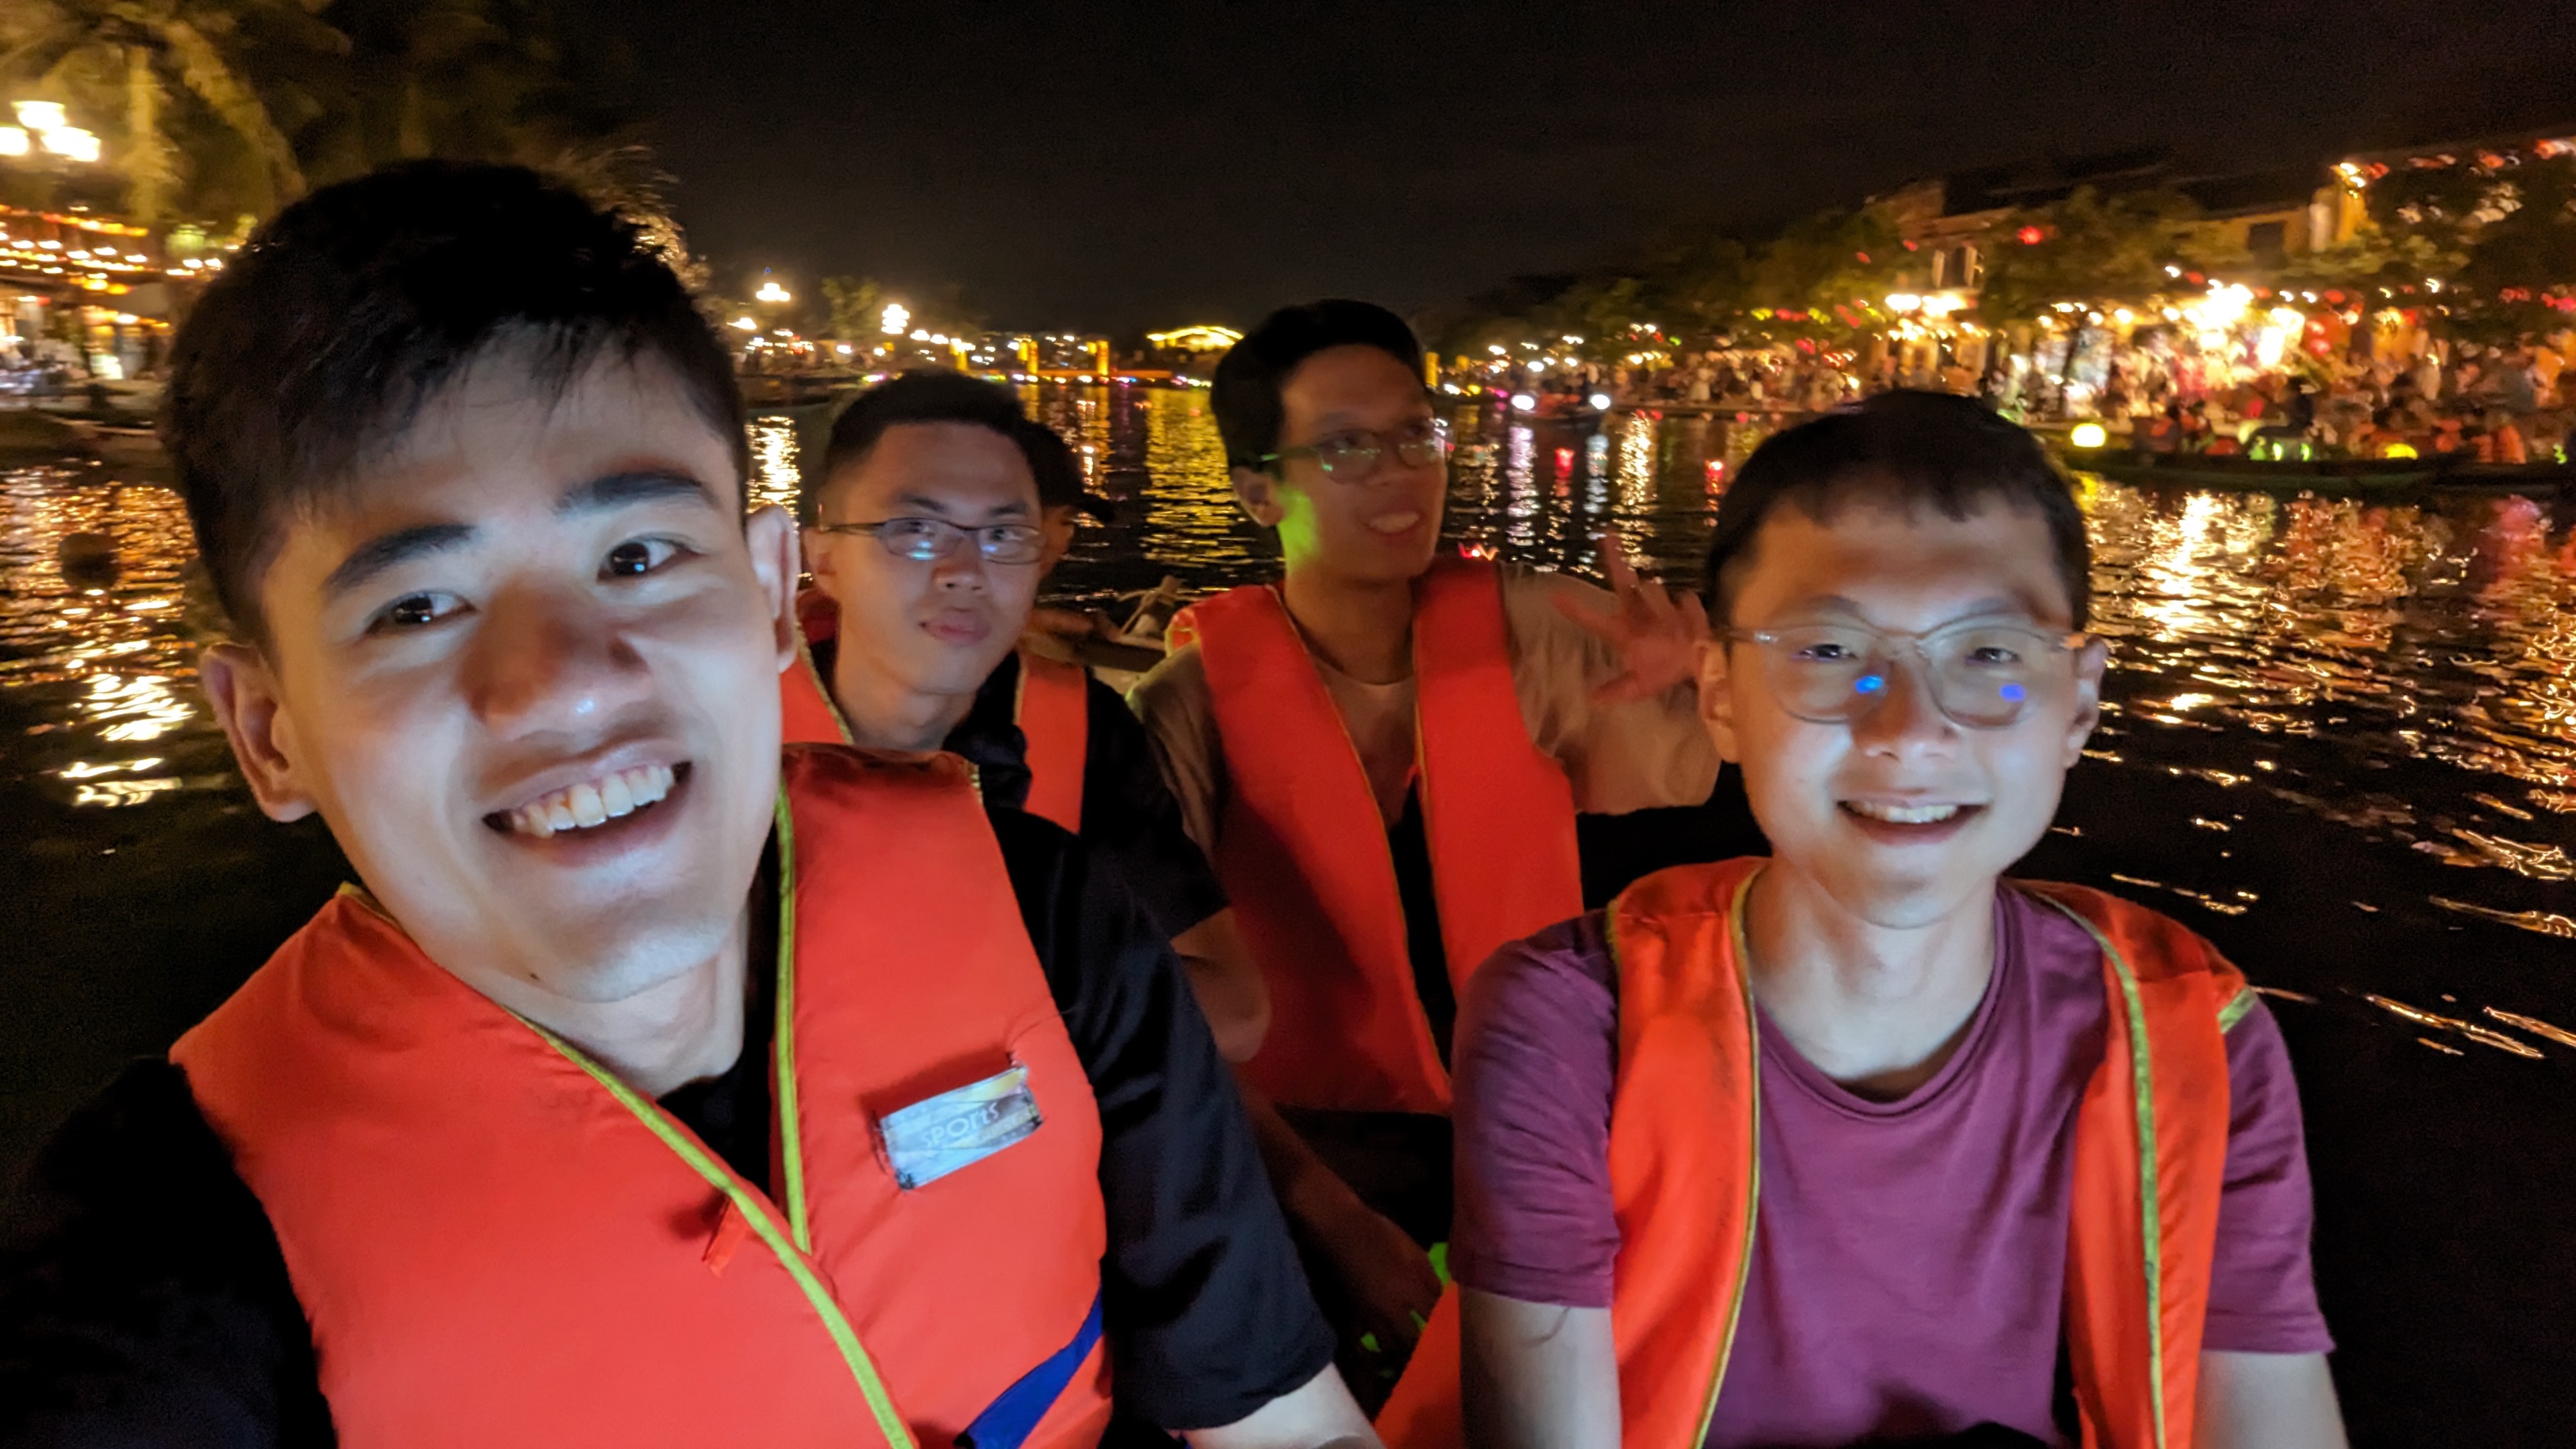 Group photo on boat ride